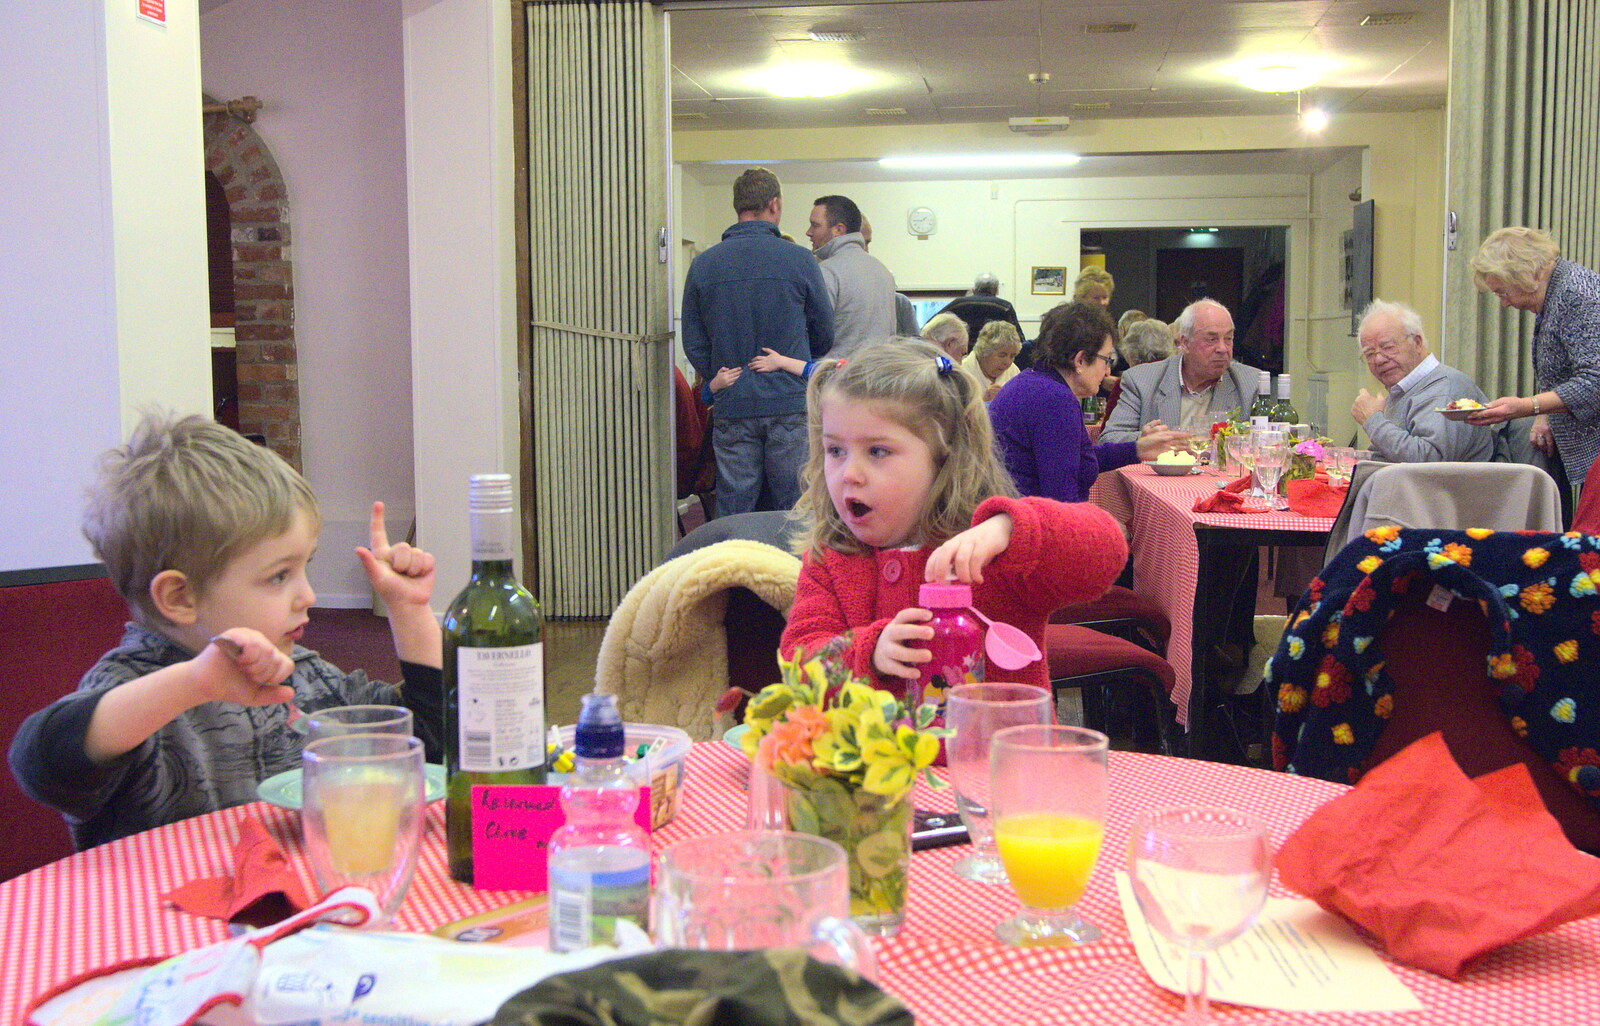 Fred and Amelia have an animated conversation from Sunday Lunch at the Village Hall, Brome, Suffolk - 3rd February 2013